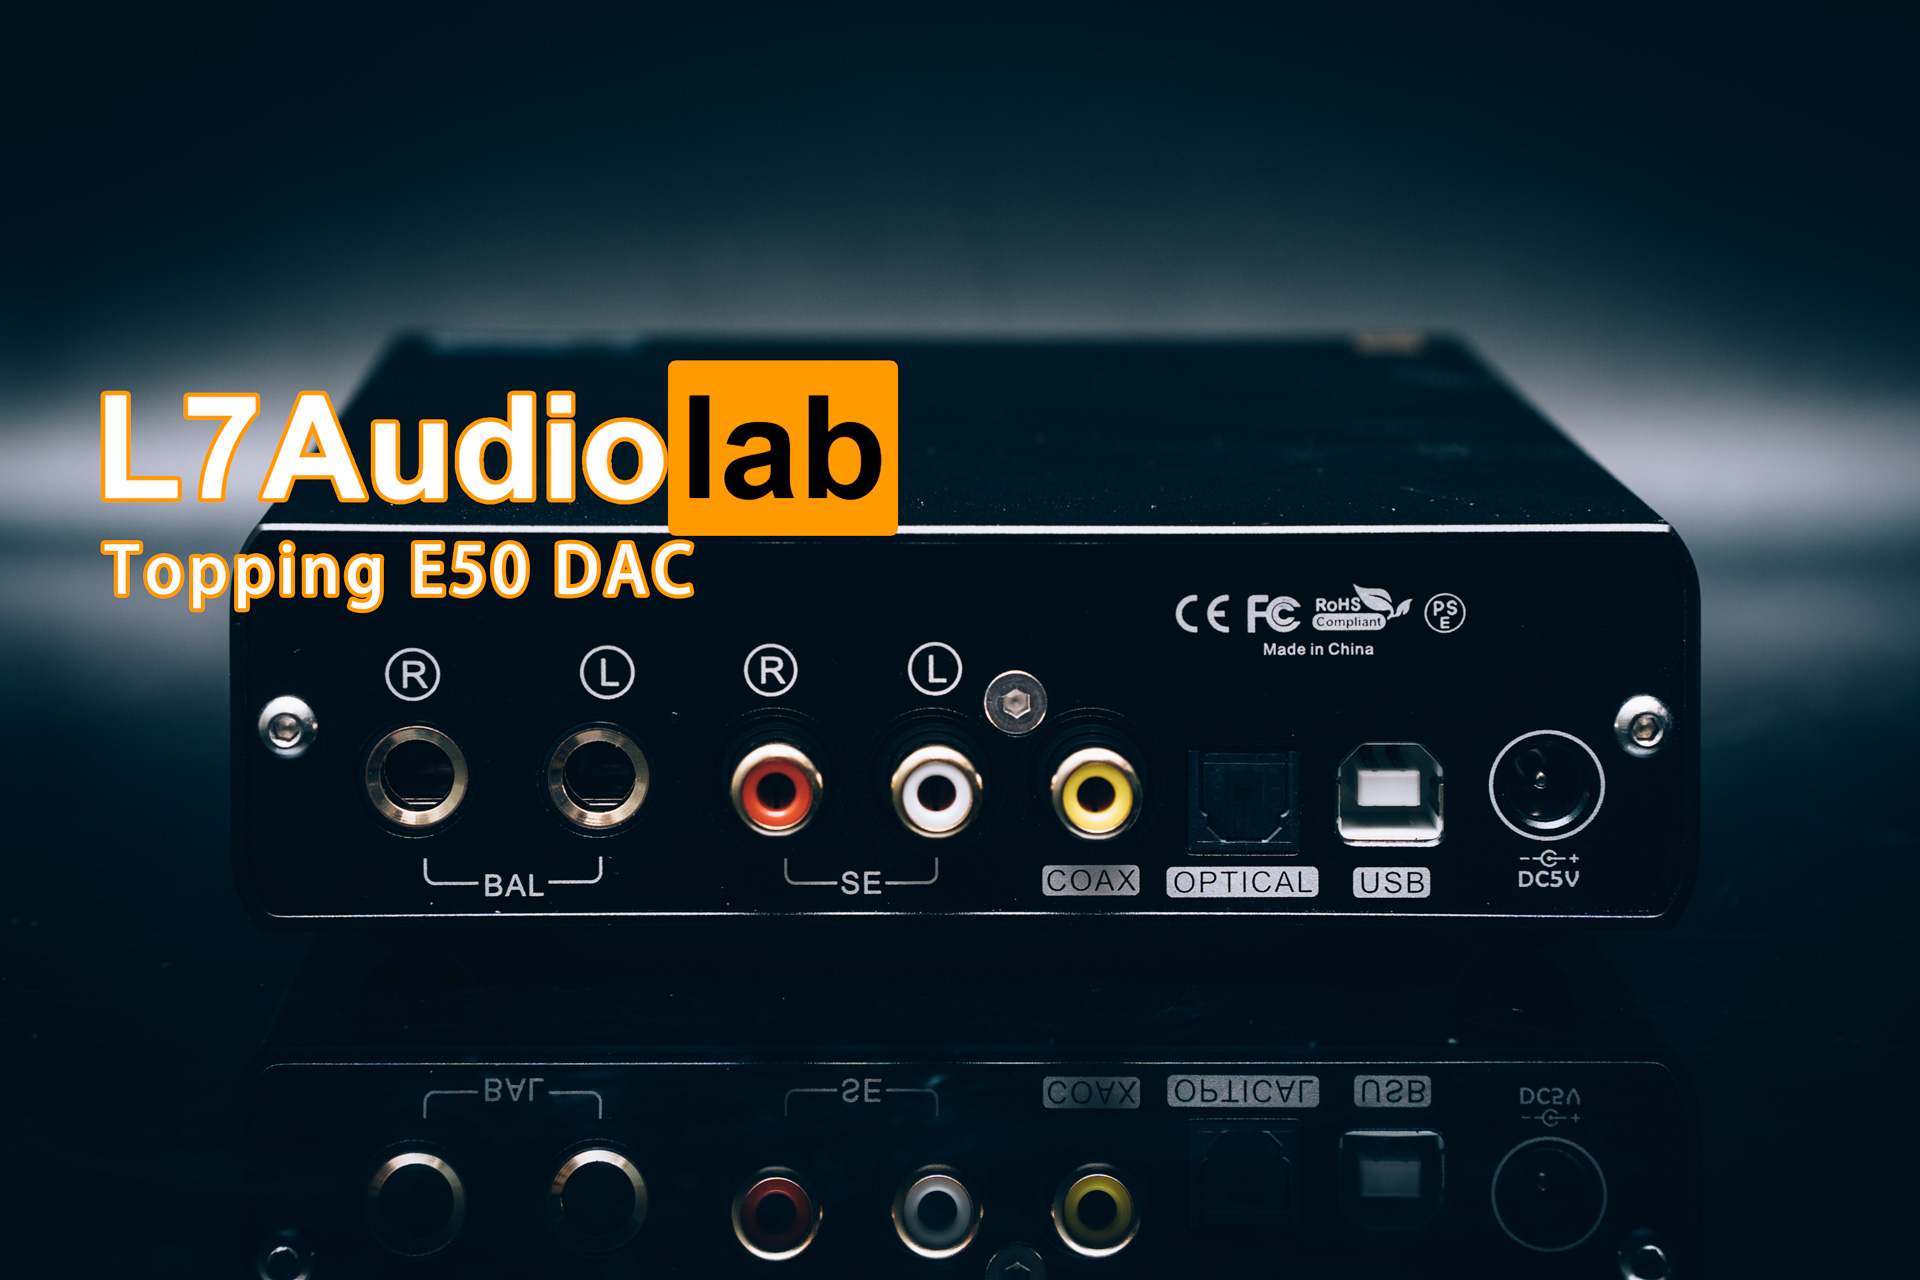 Measurements of Topping E50 DAC - L7Audiolab